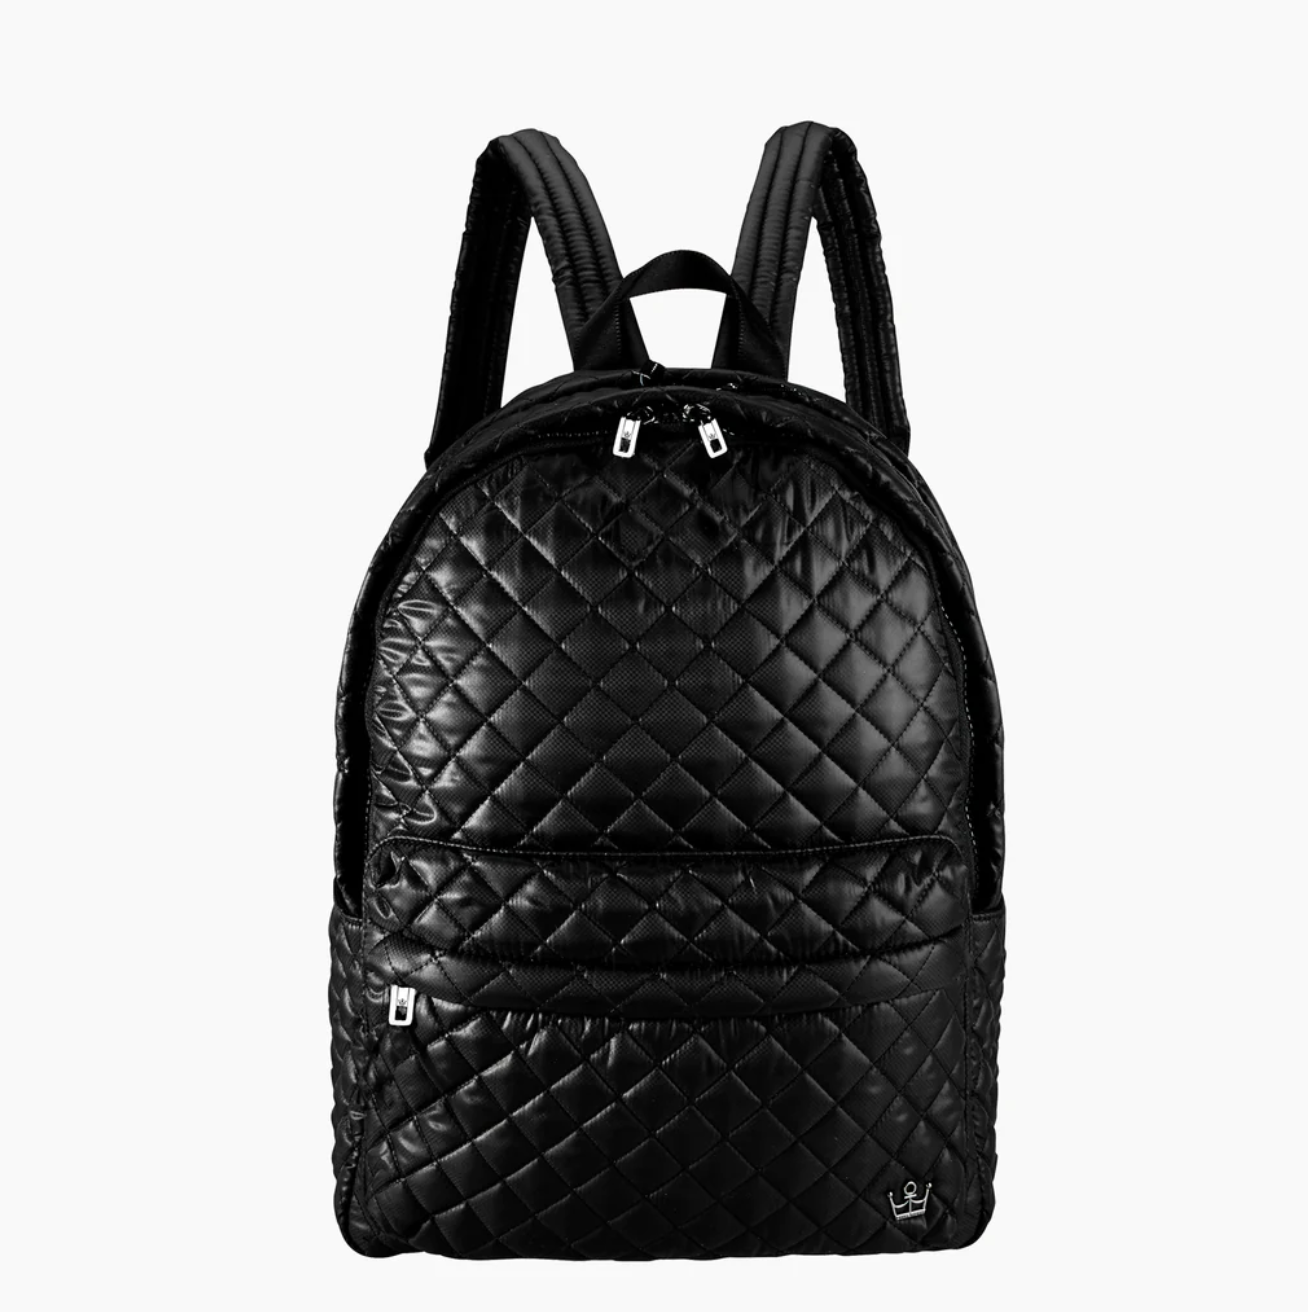 Oliver Thomas Wingwoman Laptop Backpack Backpacks in Black at Wrapsody